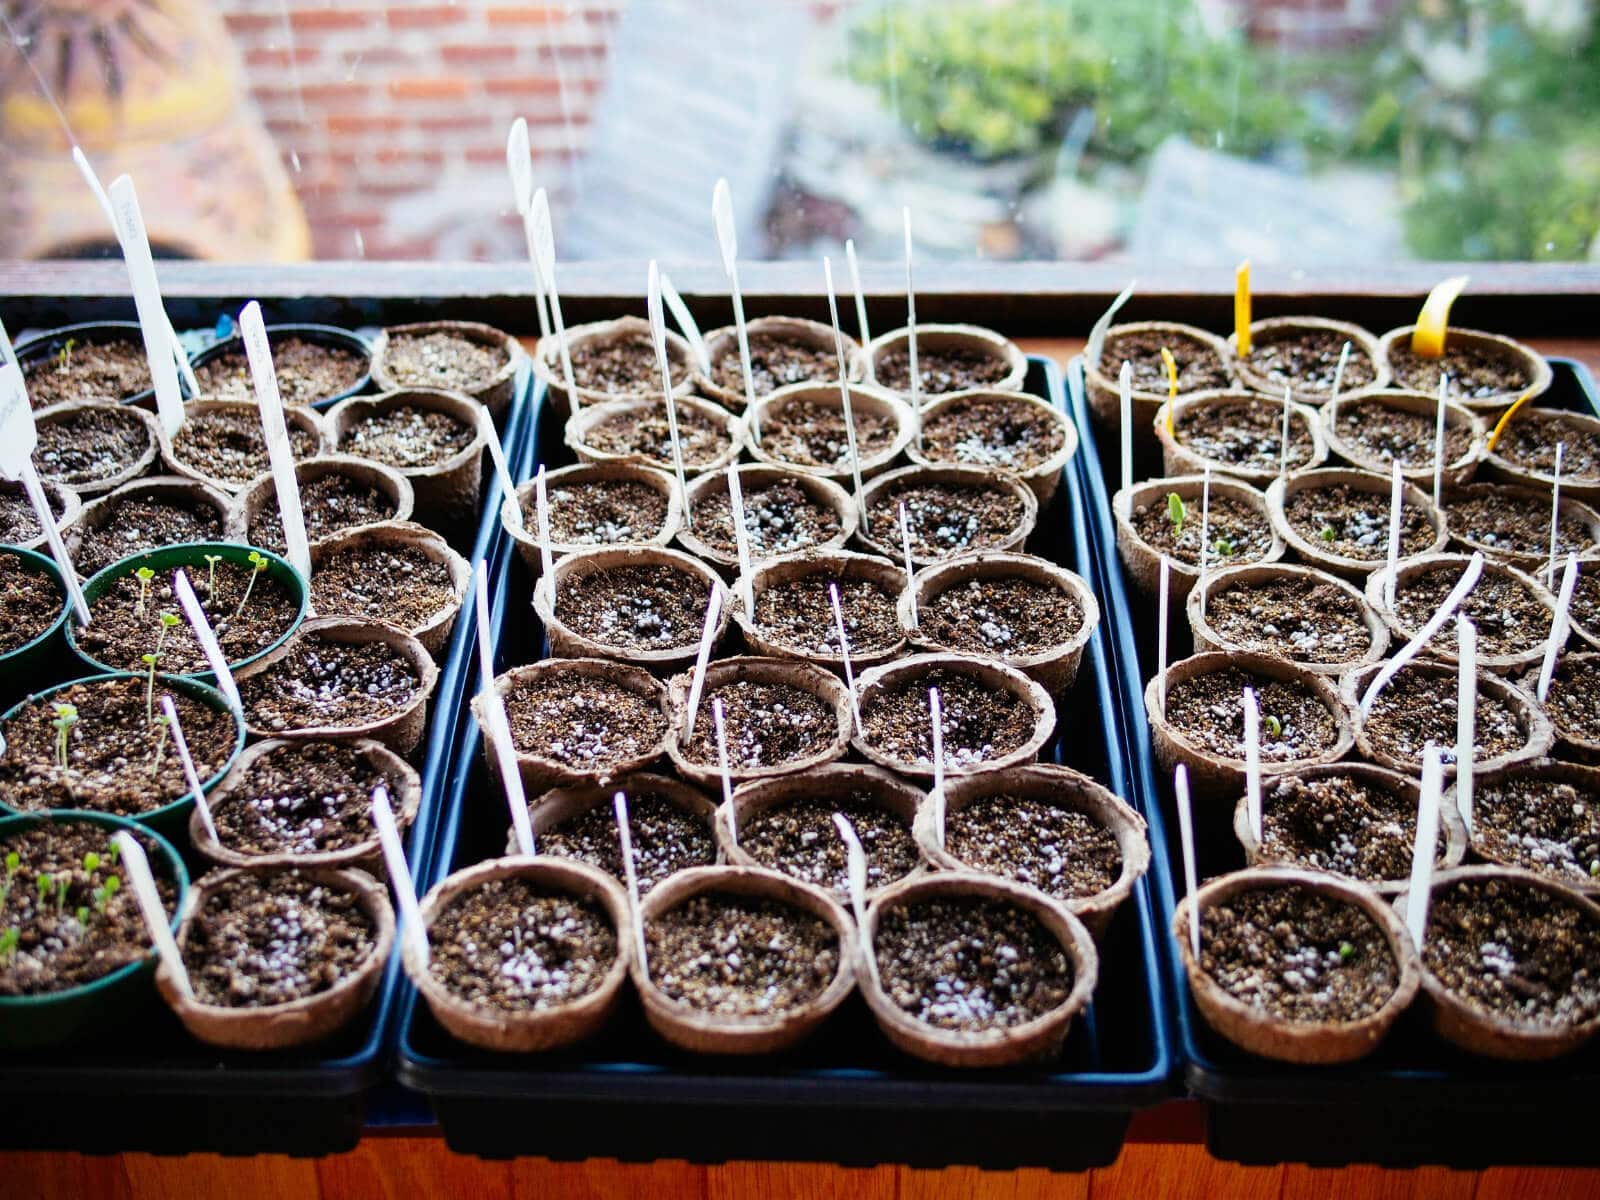 Use cheap paper pots from the dollar store for starting seeds